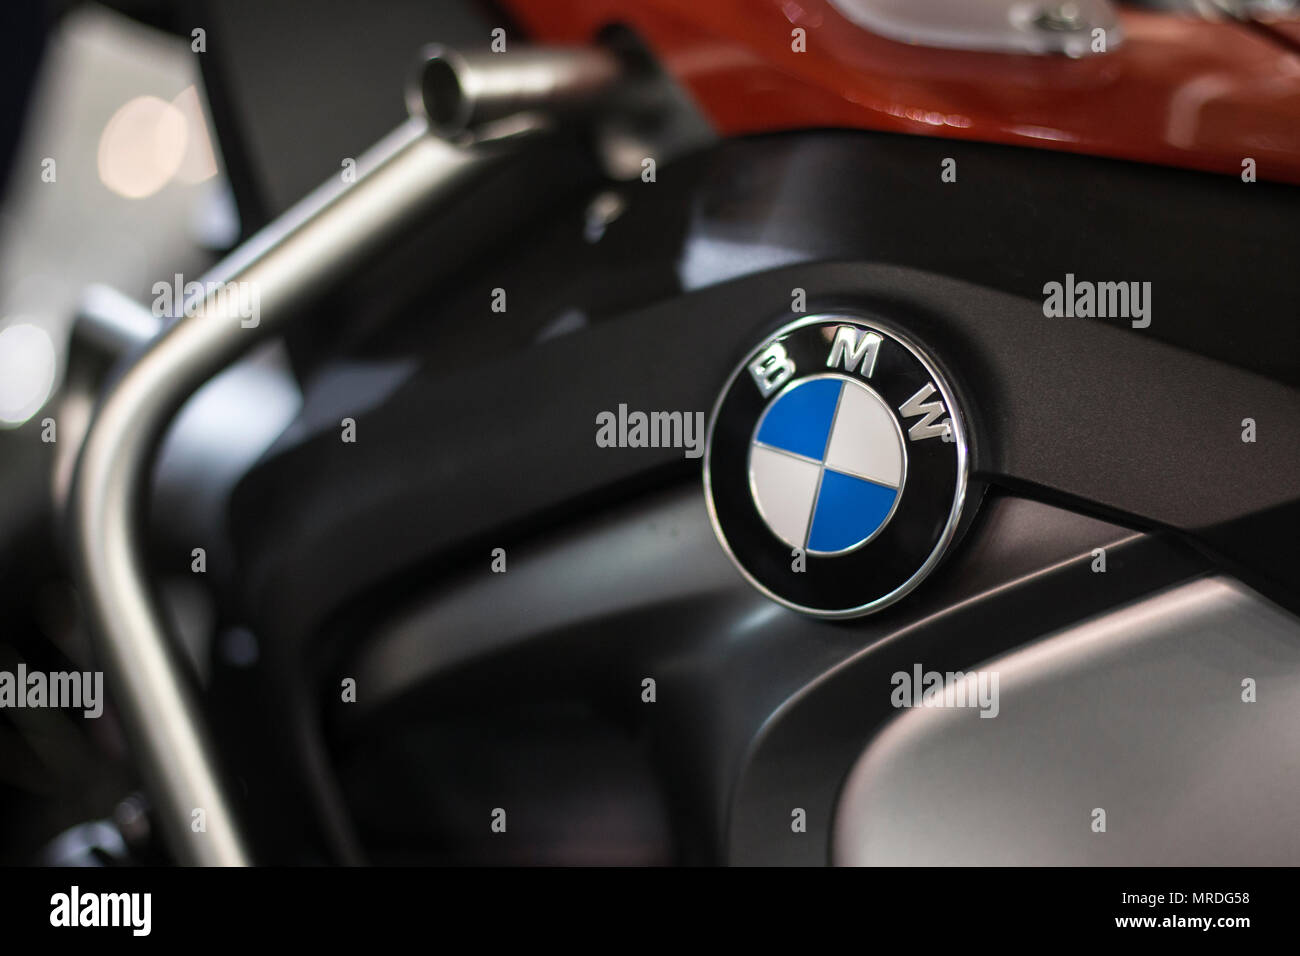 BMW logo on a motorcycle Stock Photo